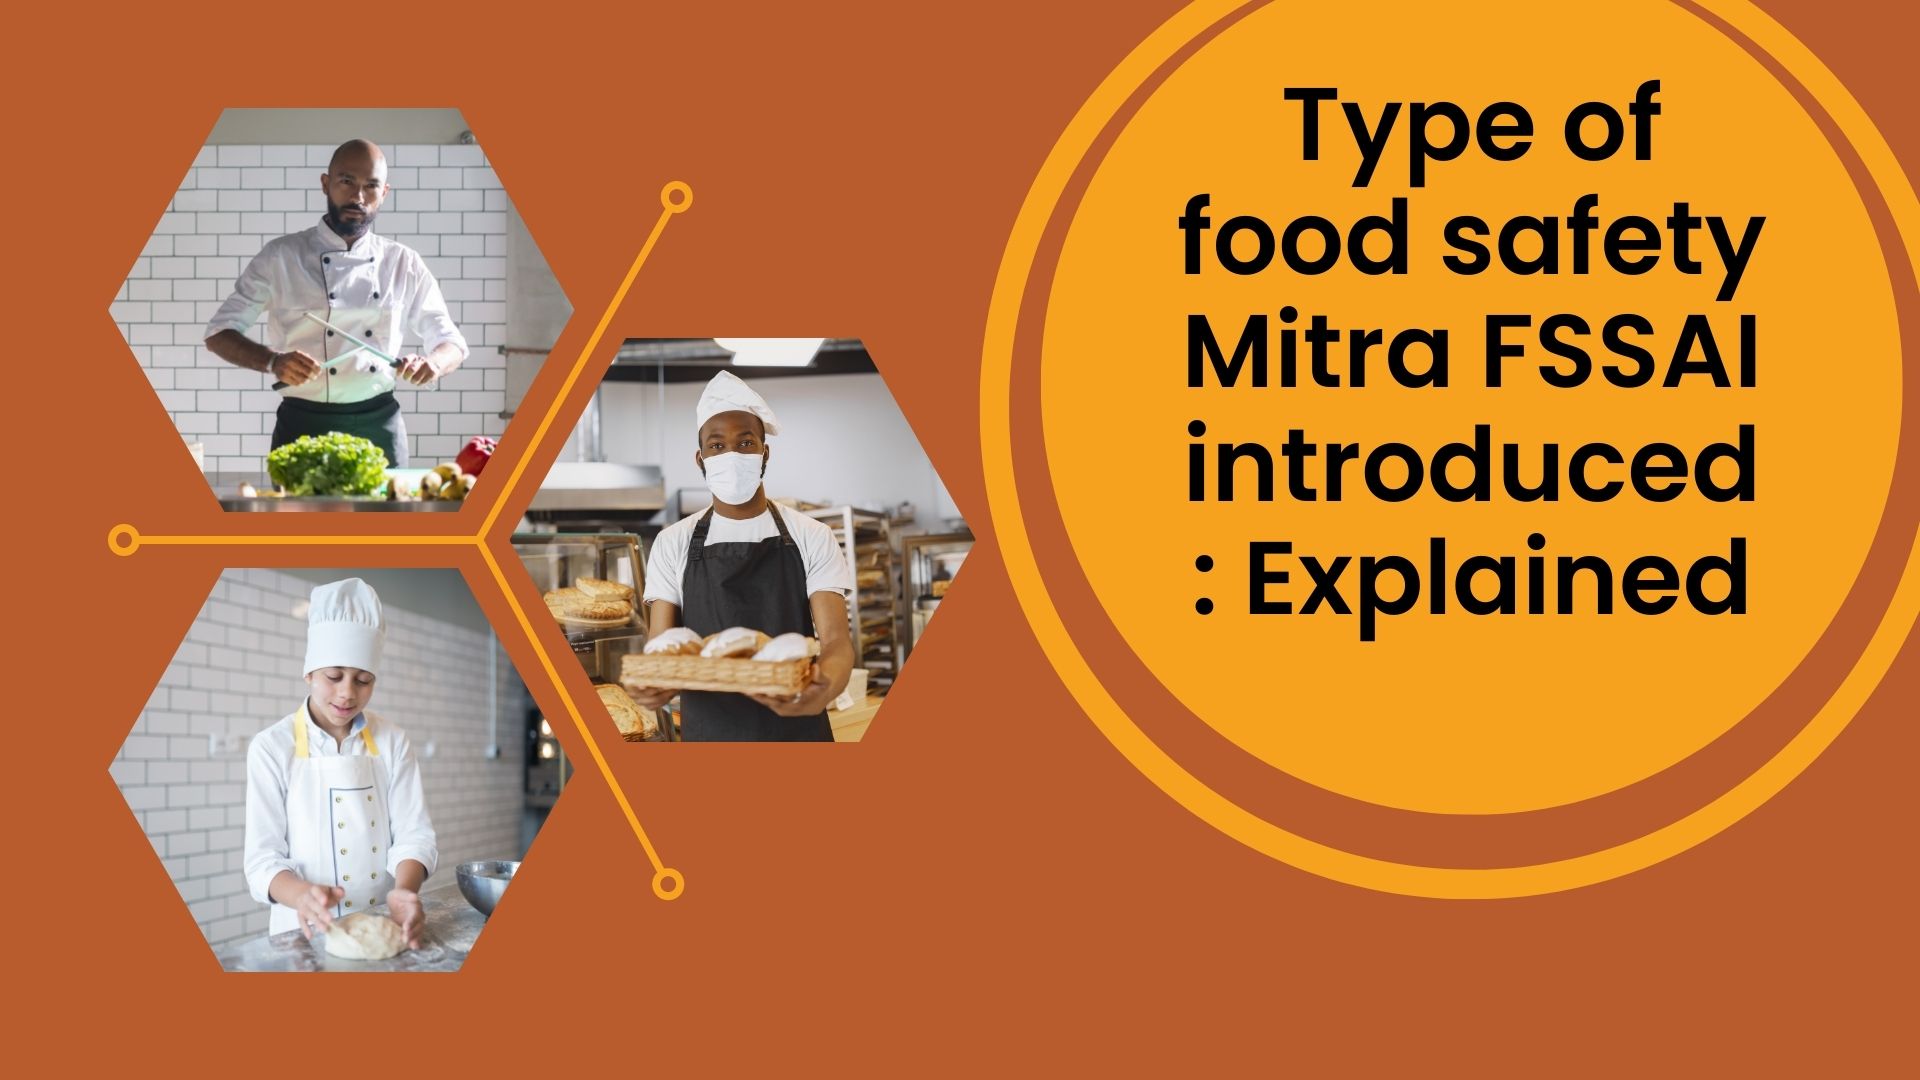 Type of food safety Mitra FSSAI introduced: Explained